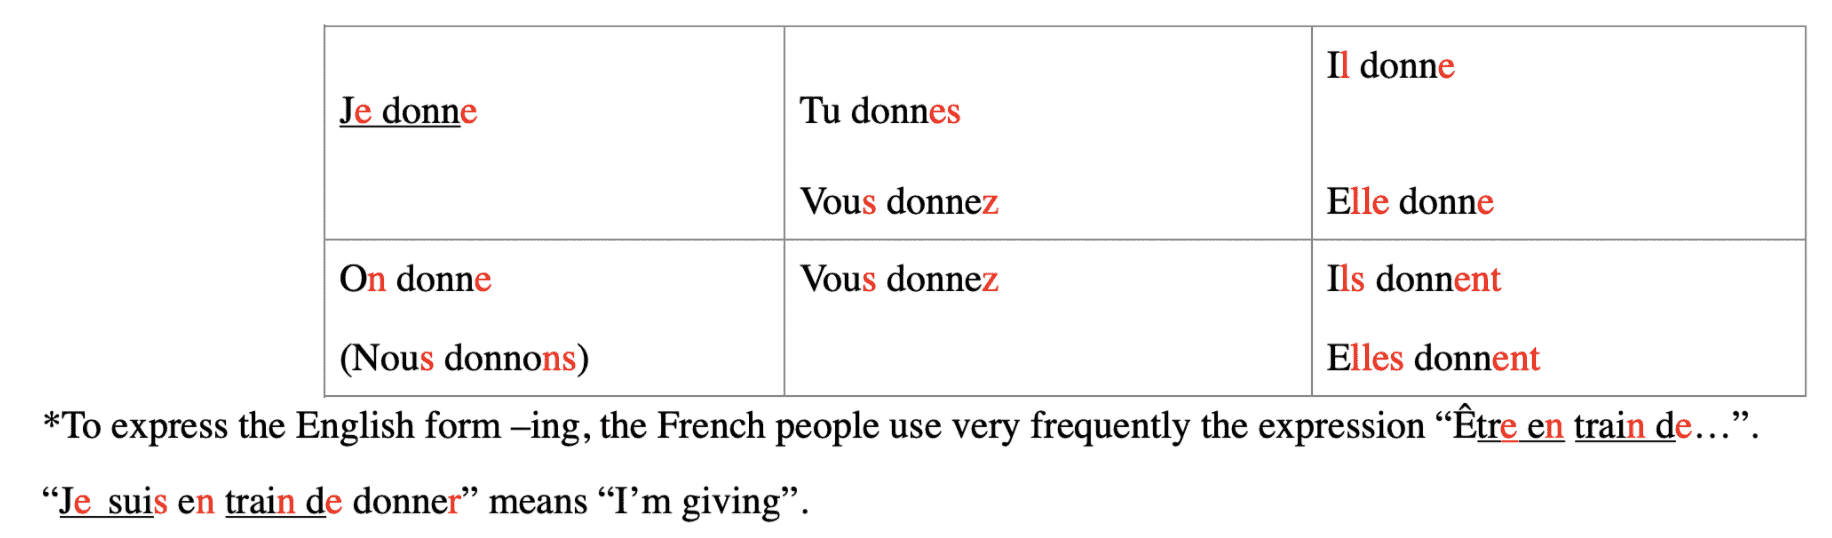 french verbs common